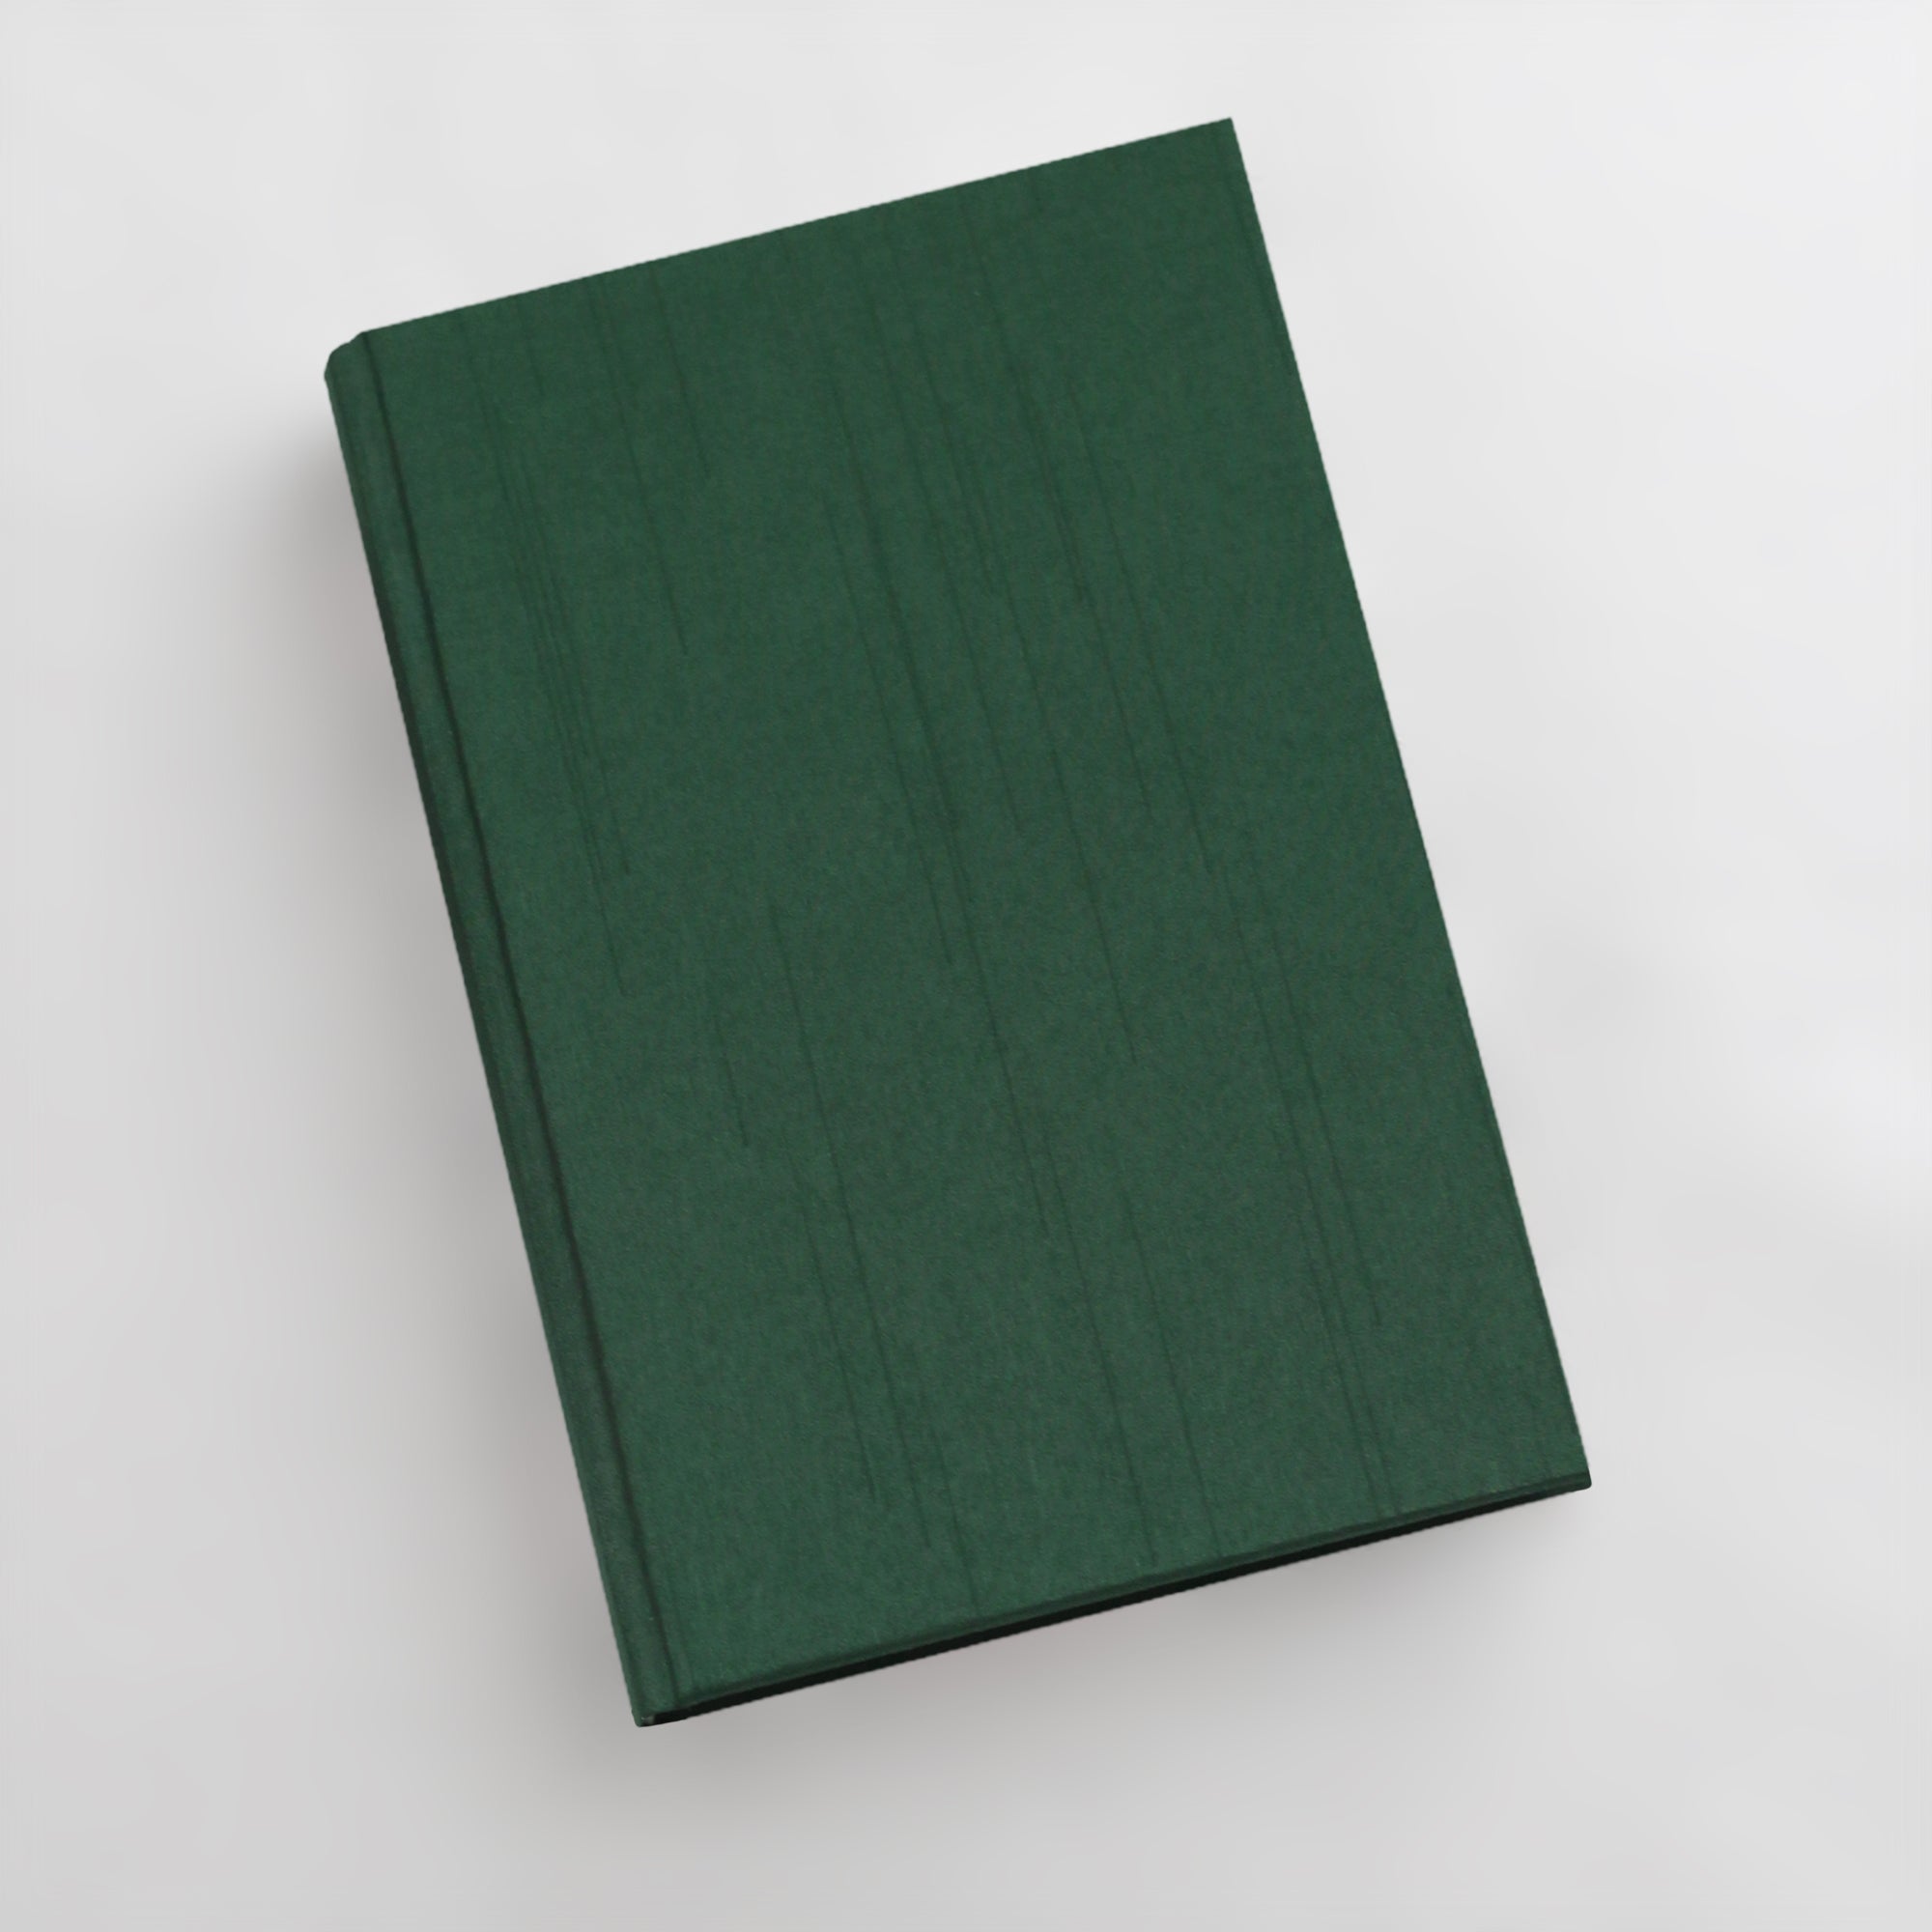 Medium 5.5x8.5 Blank Page Journal, Cover: Celery Cotton